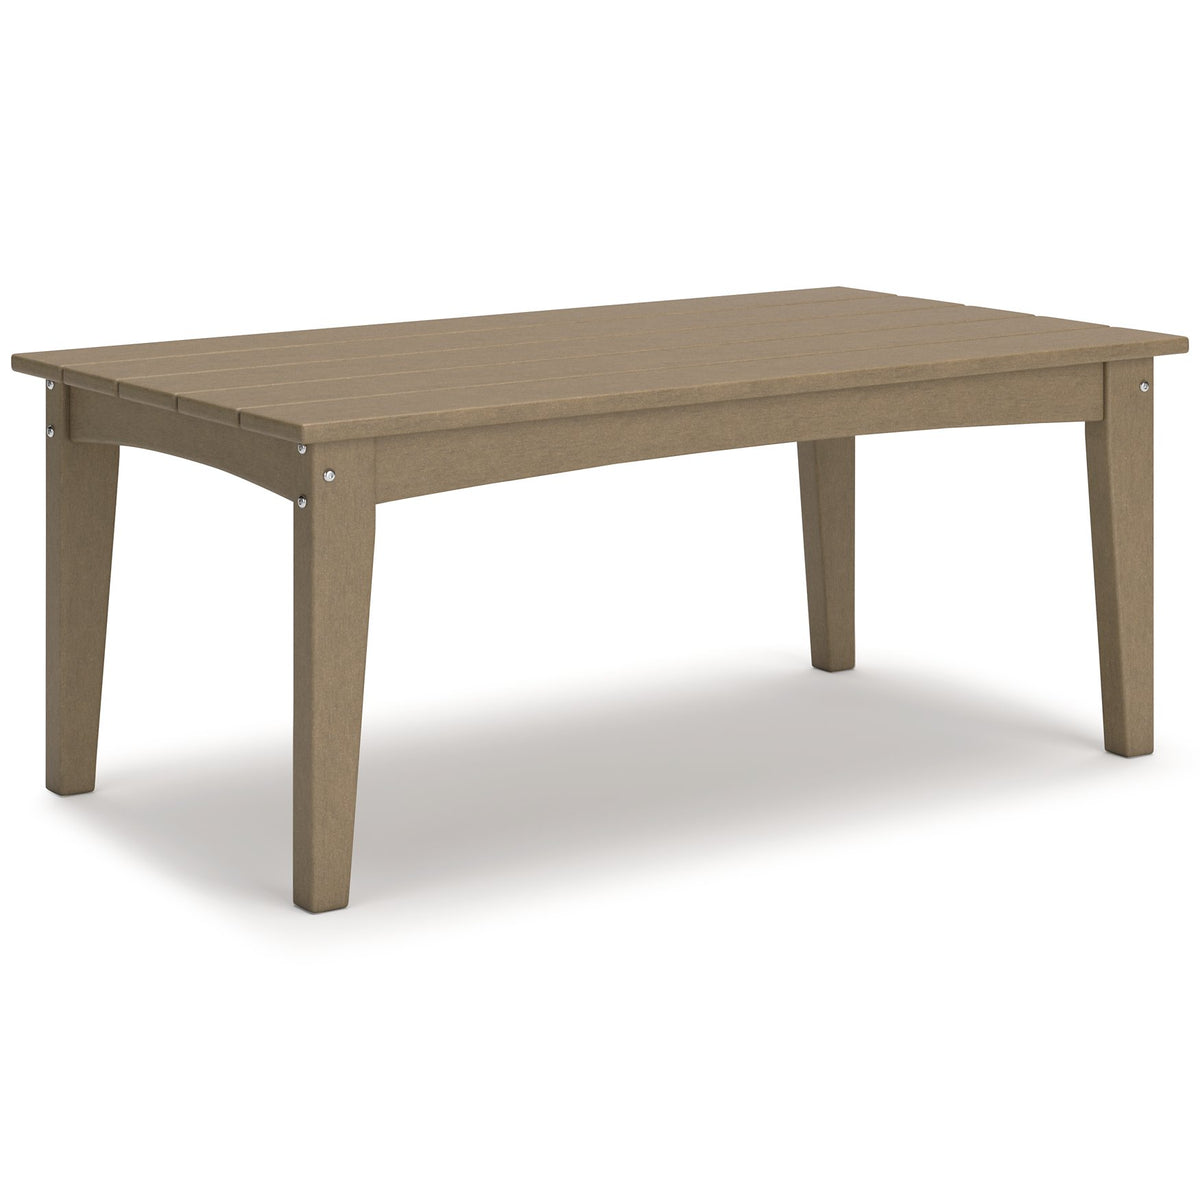 Hyland wave Outdoor Coffee Table  Half Price Furniture